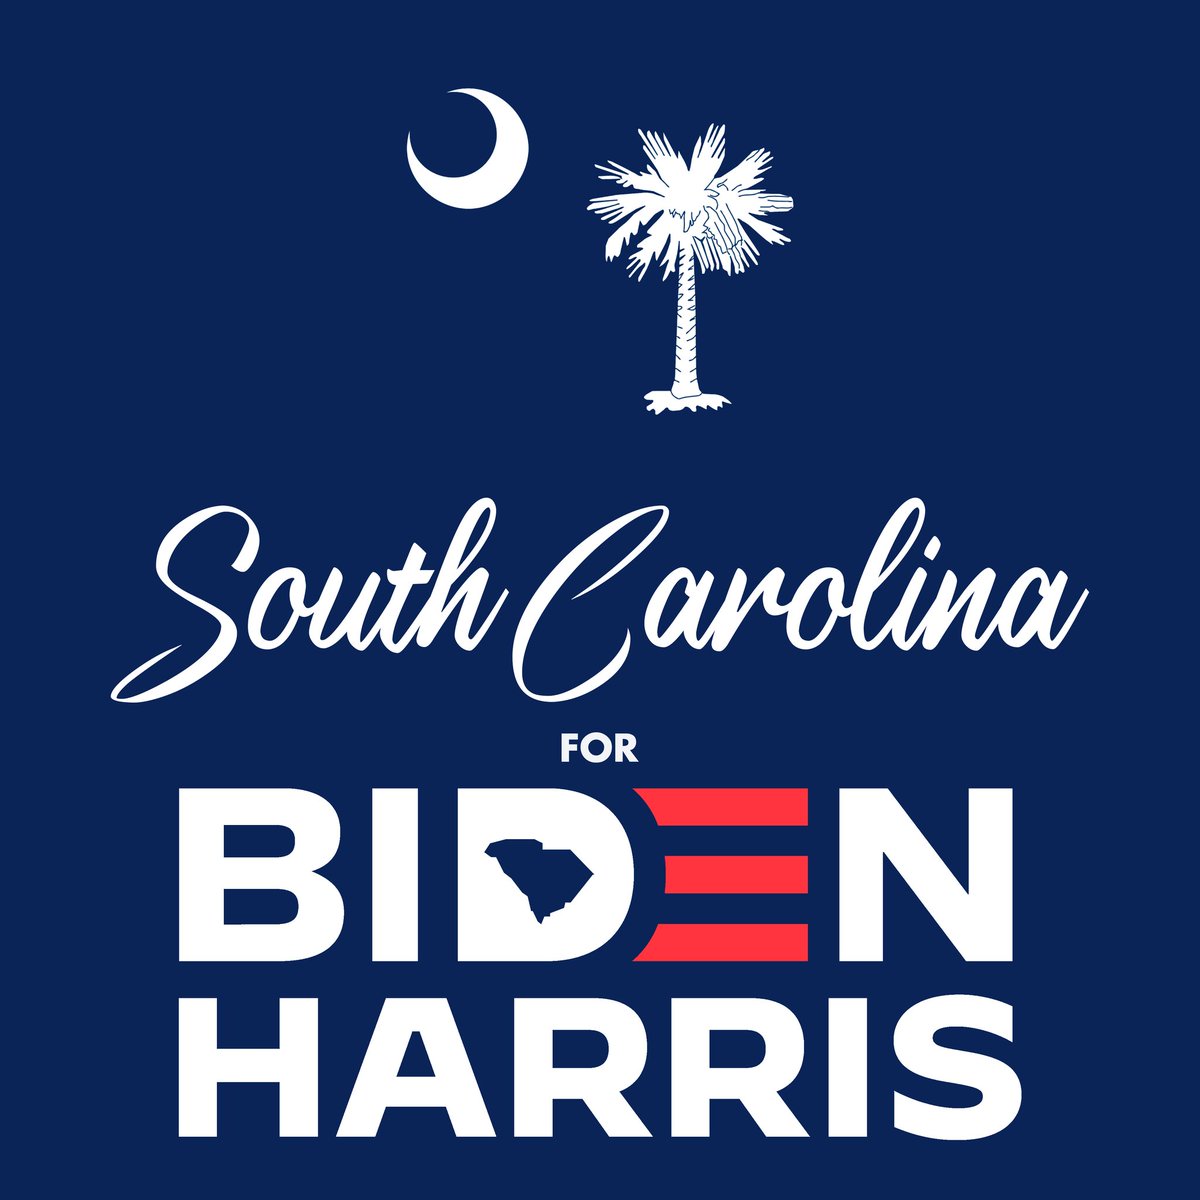 ICYMI my husband  @viva_verde is incredibly talented and made these beautiful state coalition graphics for  #BidenHarris supporters. More otw and he takes requests for priority! RT your state if you're  #RidinWithBidenHarris 6/8  #NorthDakota  #Ohio  #Pennsylvania  #SouthCarolina